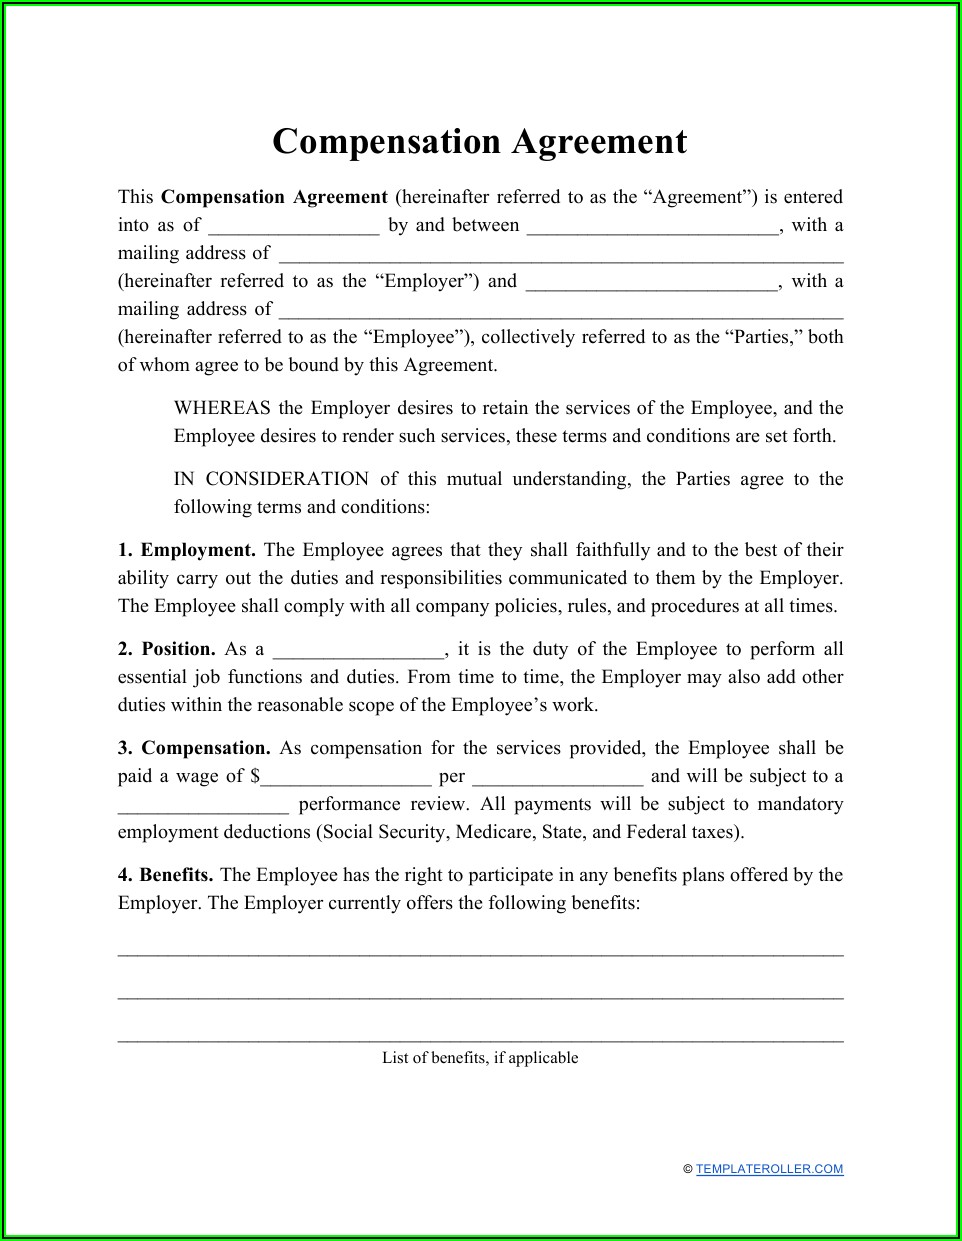 Finder's Fee Commission Agreement Template